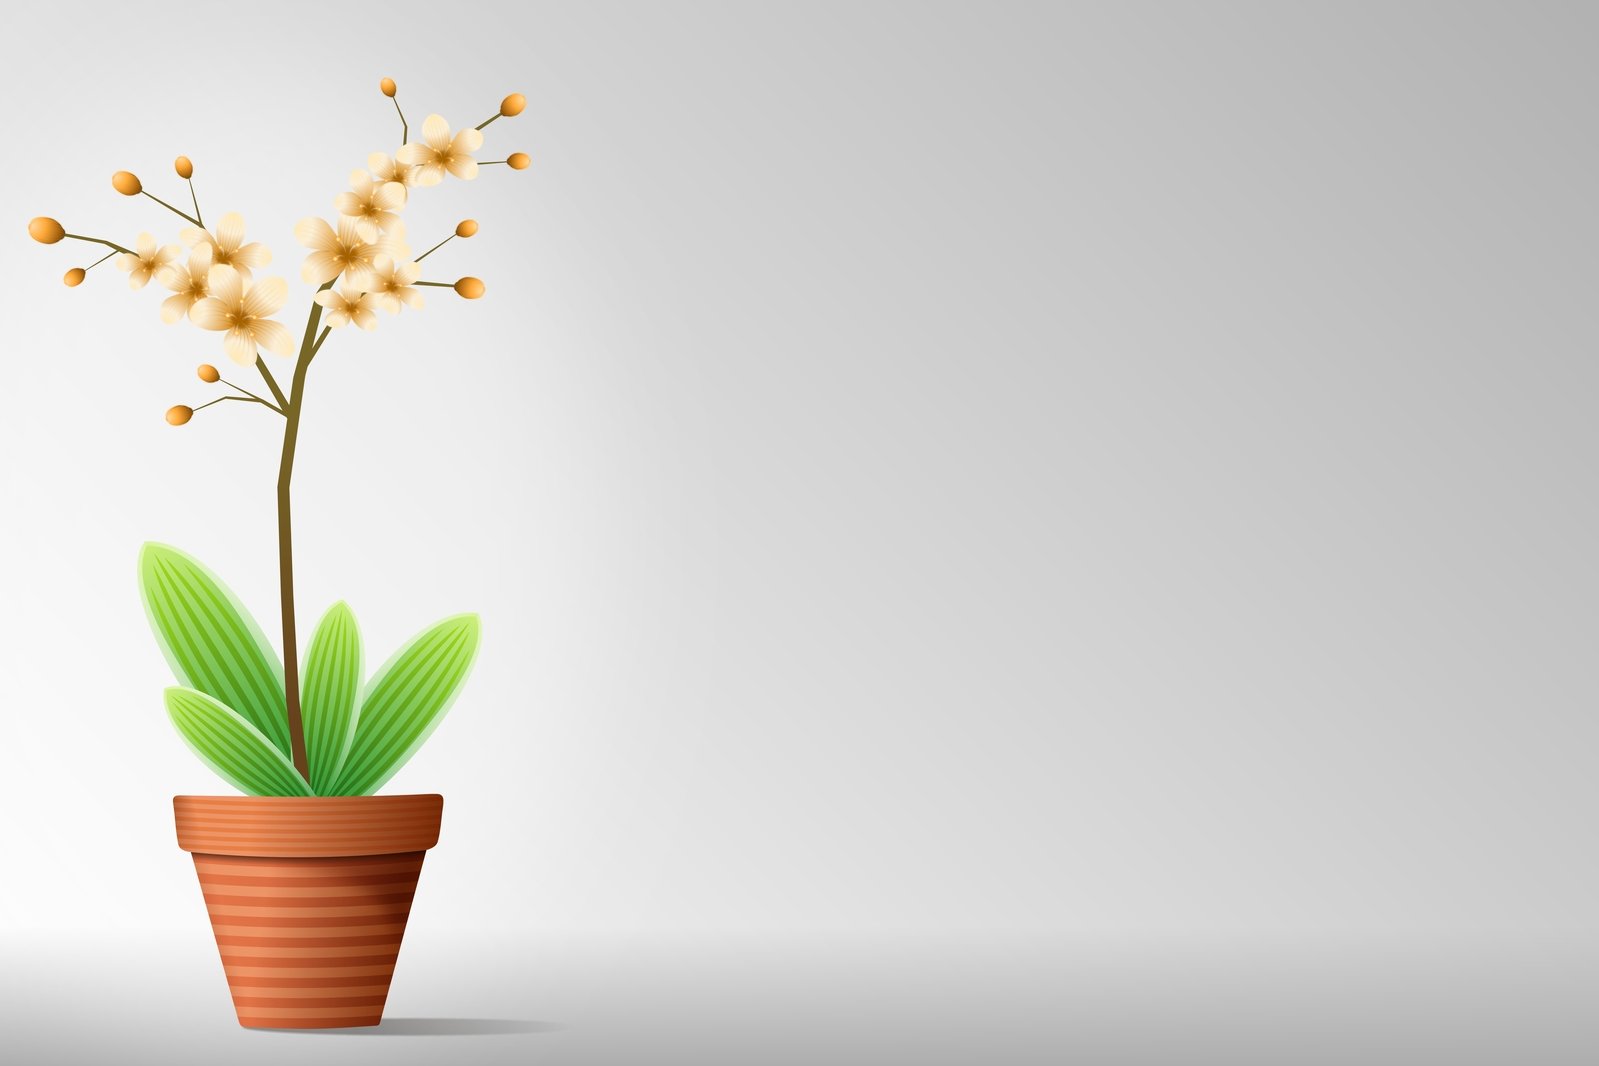 an illustration of a potted plant with a brown stem